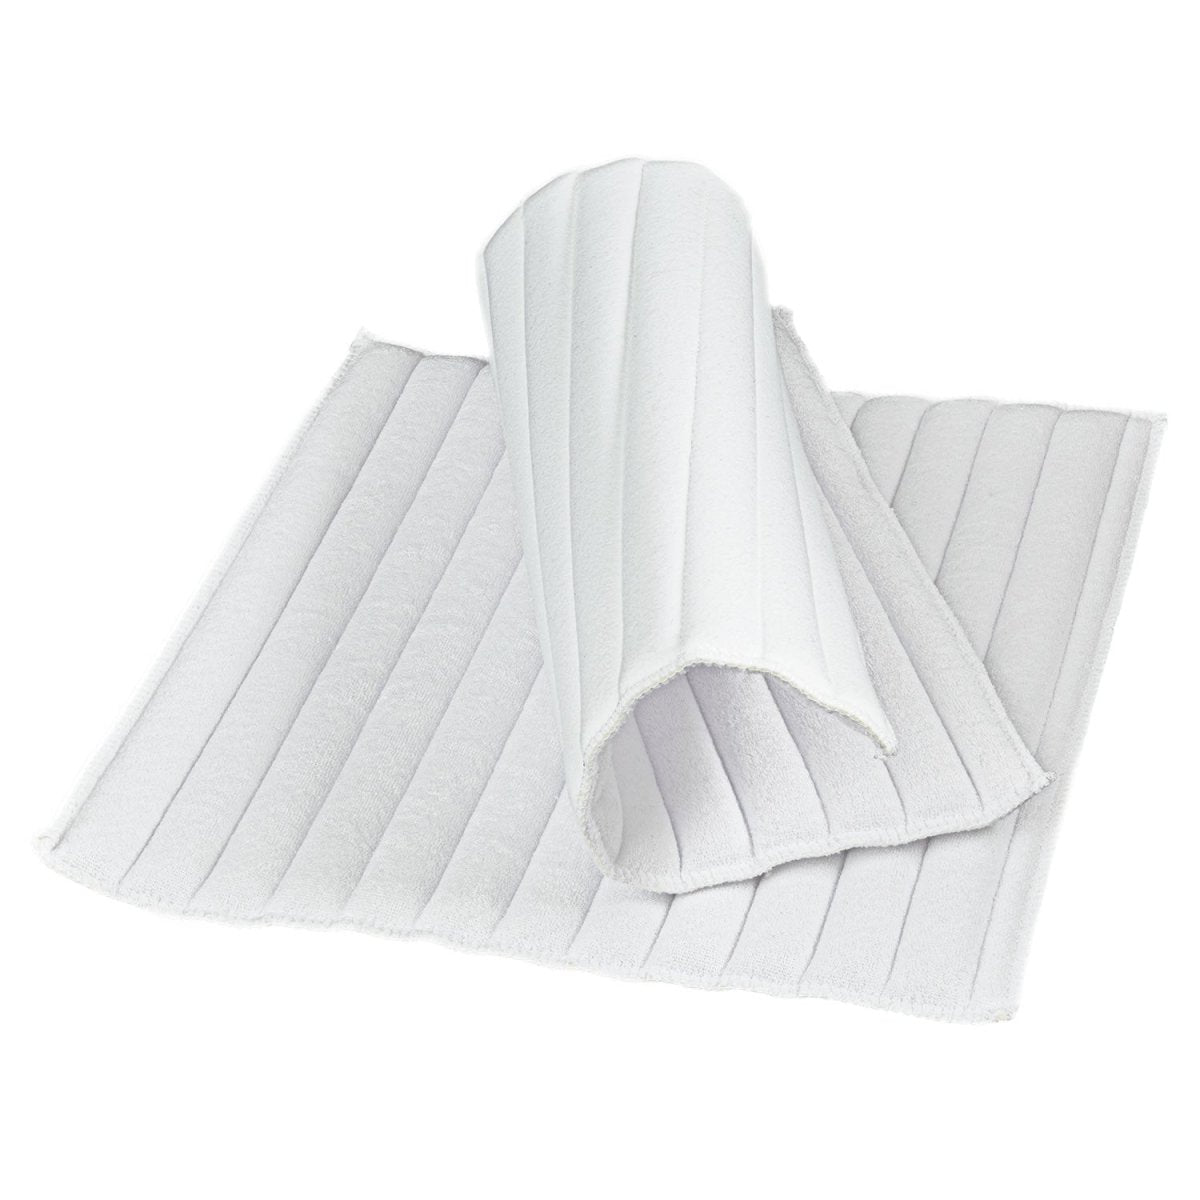 Bitz Quilted Leg Pads - White - Large